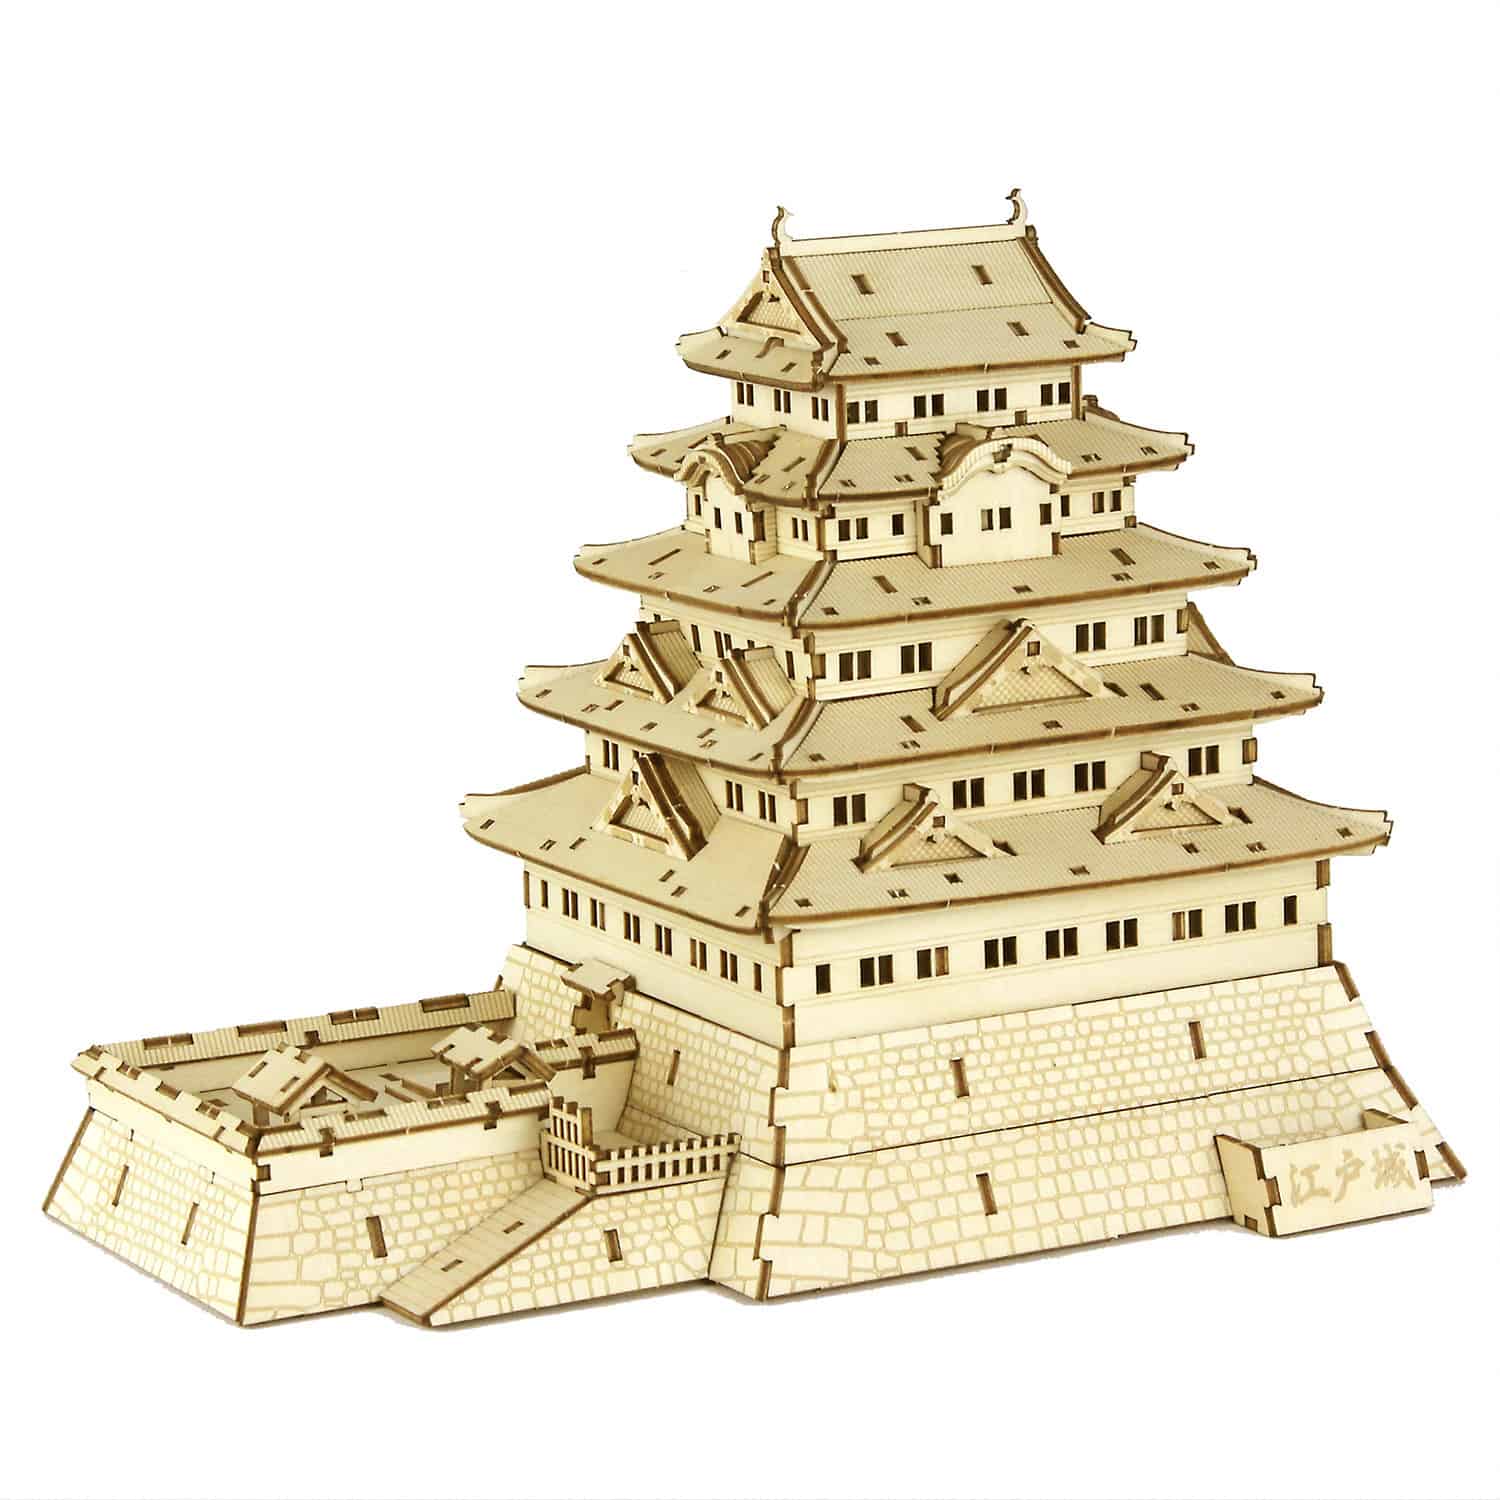  ki-gu-mi One Piece Going Merry Ship Model - One Piece Model Kit  Series - Japanese Miniature Wooden 3D Puzzle for Adults and Teens - Fun DIY  Wood Craft Kits for Adults